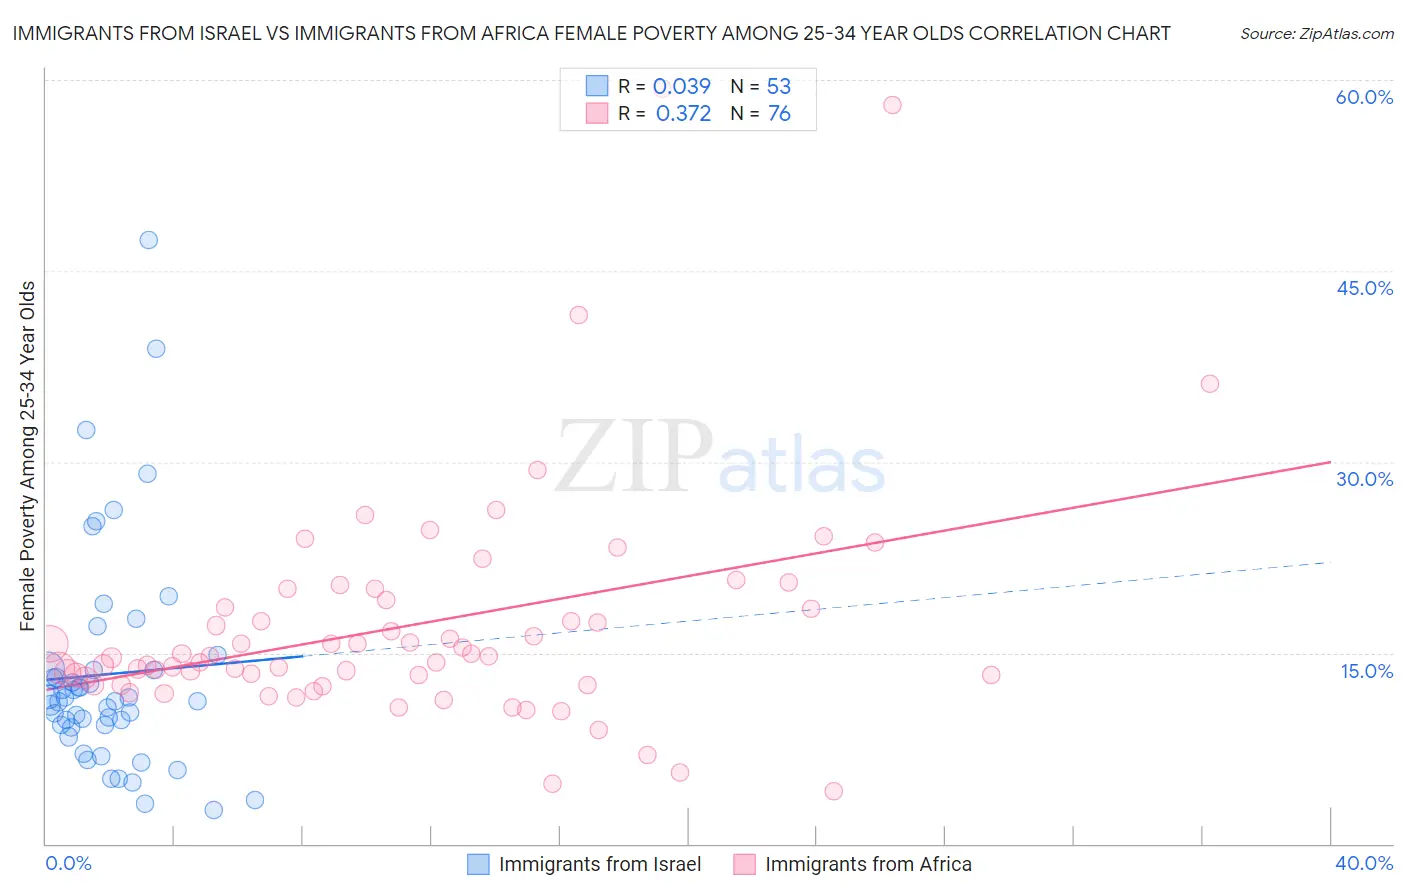 Immigrants from Israel vs Immigrants from Africa Female Poverty Among 25-34 Year Olds